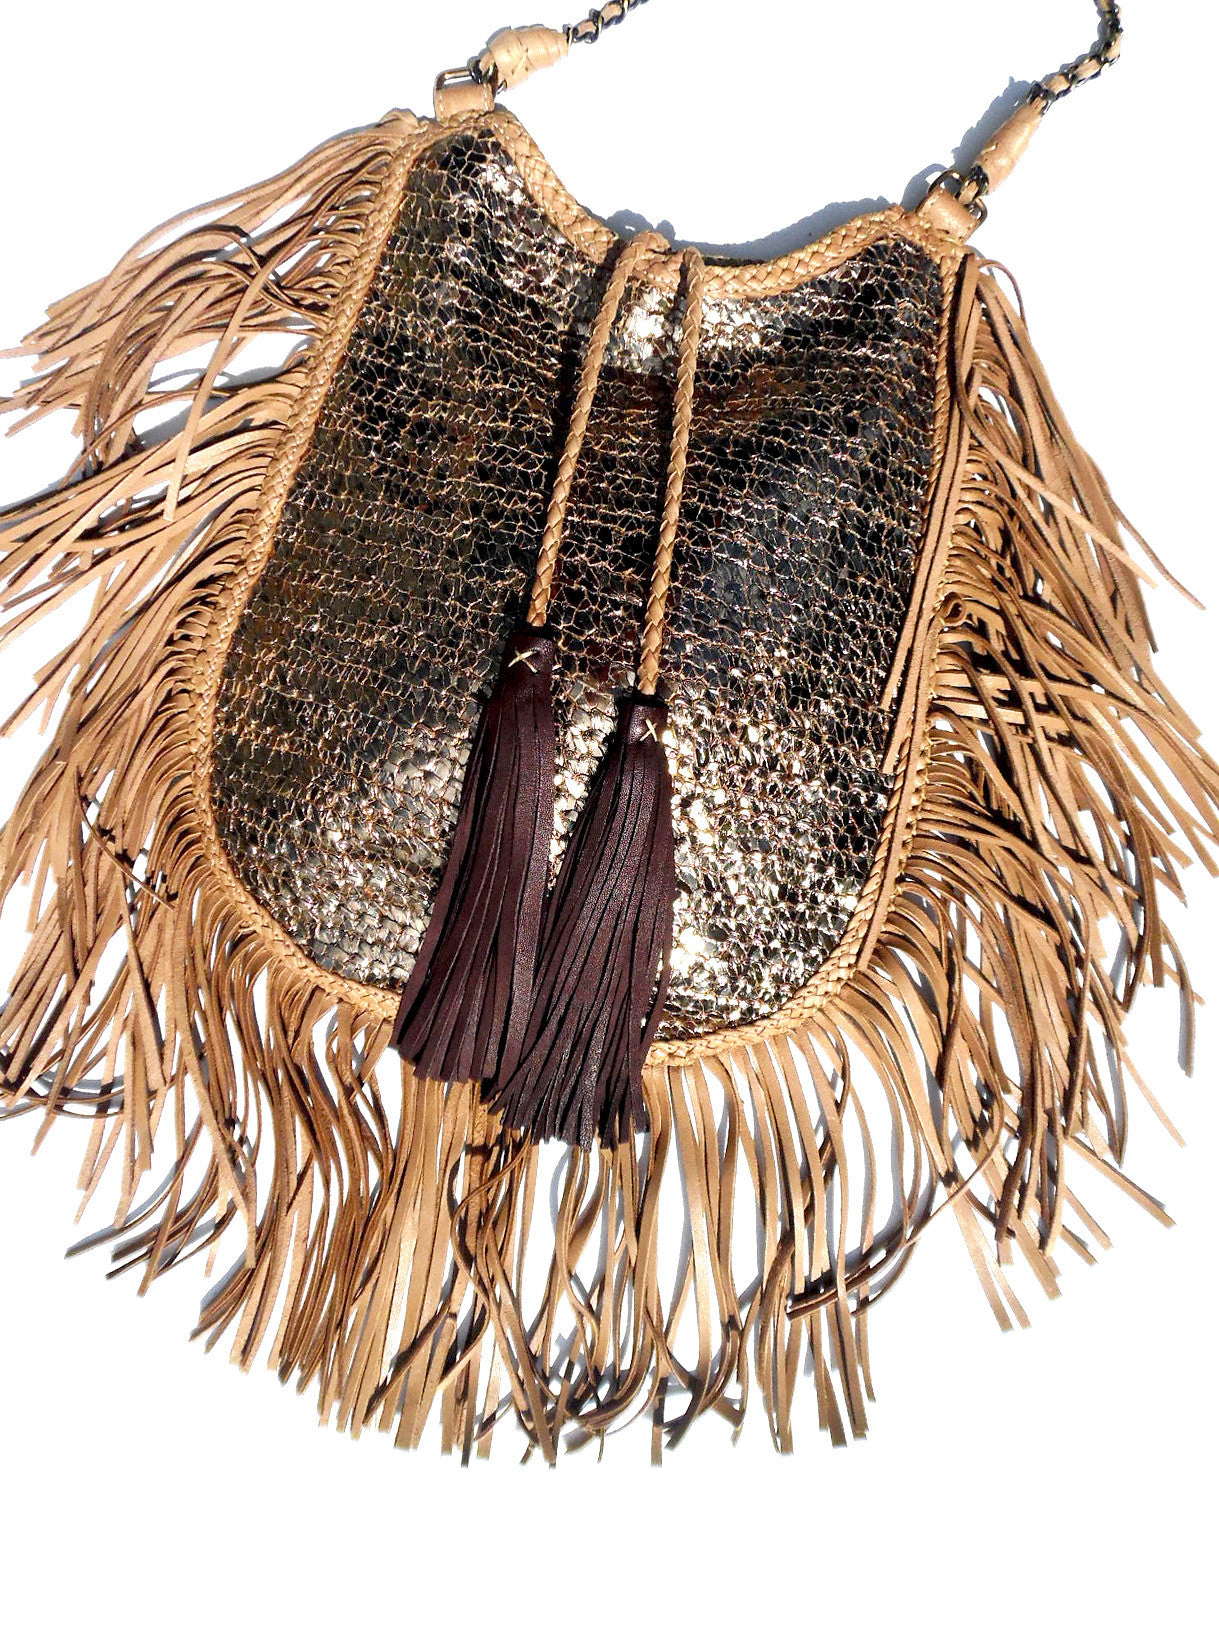 Hand Woven Leather Shoulder Cross Body Bag with Contrast Tassel